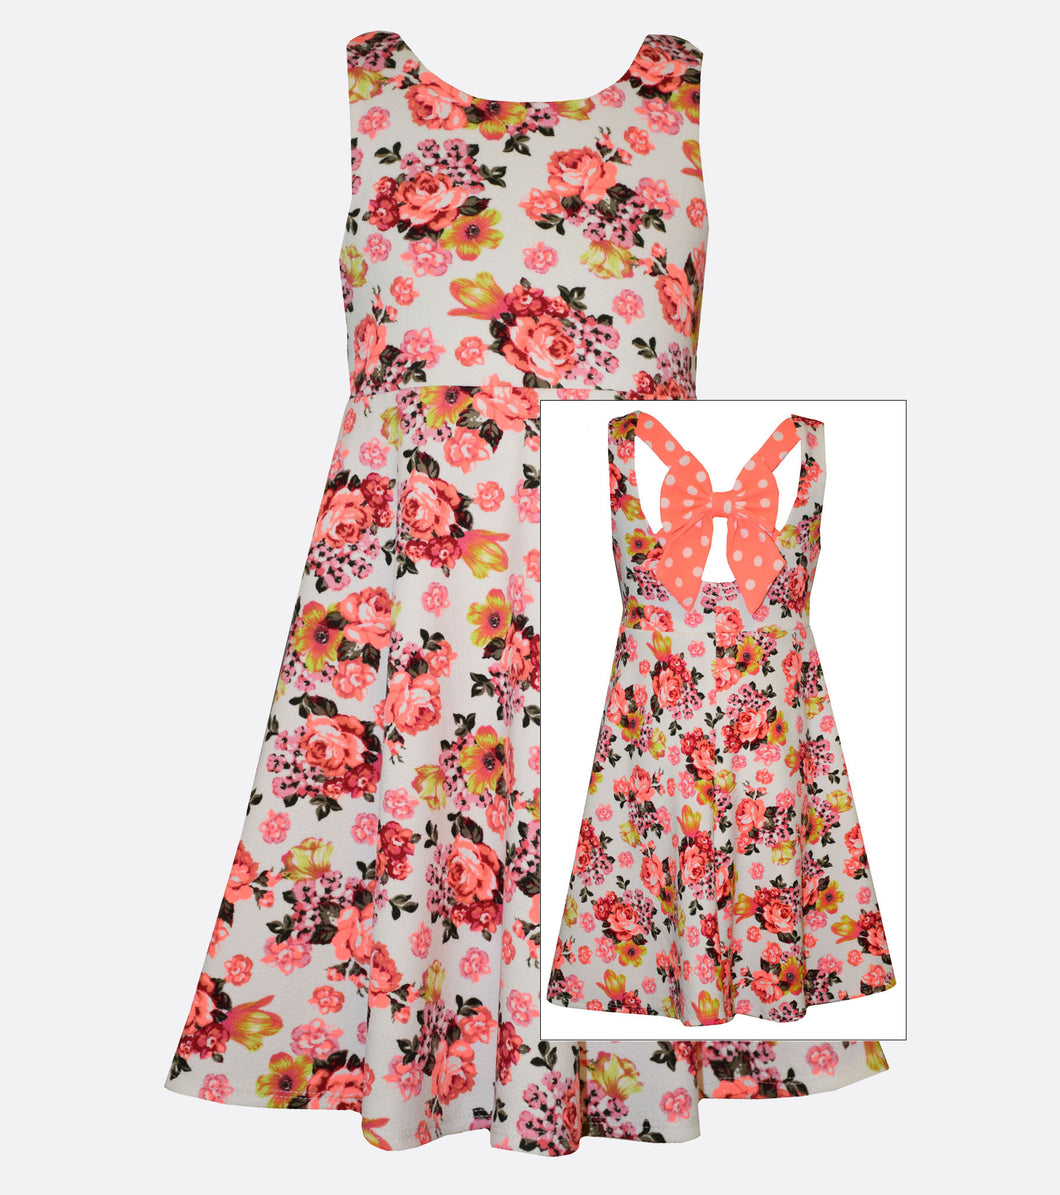 Bonnie Jean Textured Floral Print Dress with Polka Dot Bow Back